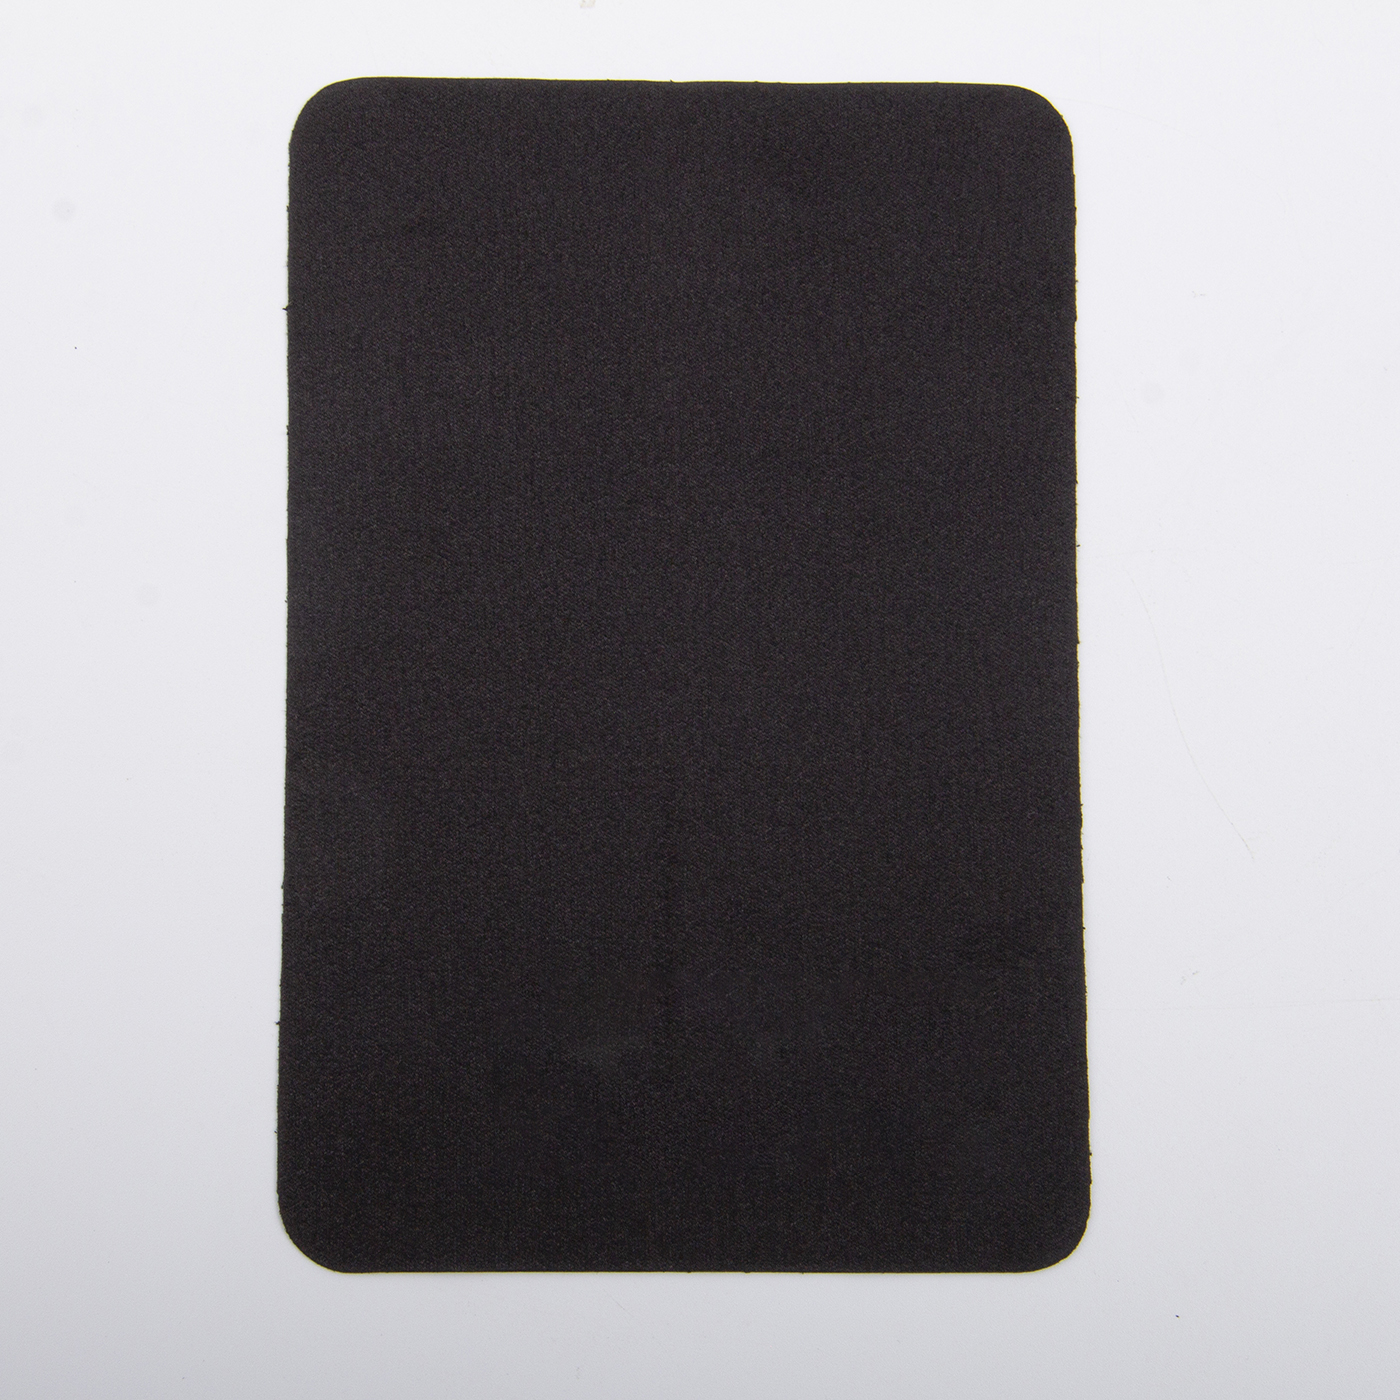 10 x 15 cm Microfiber Suede Cleaning Cloth3